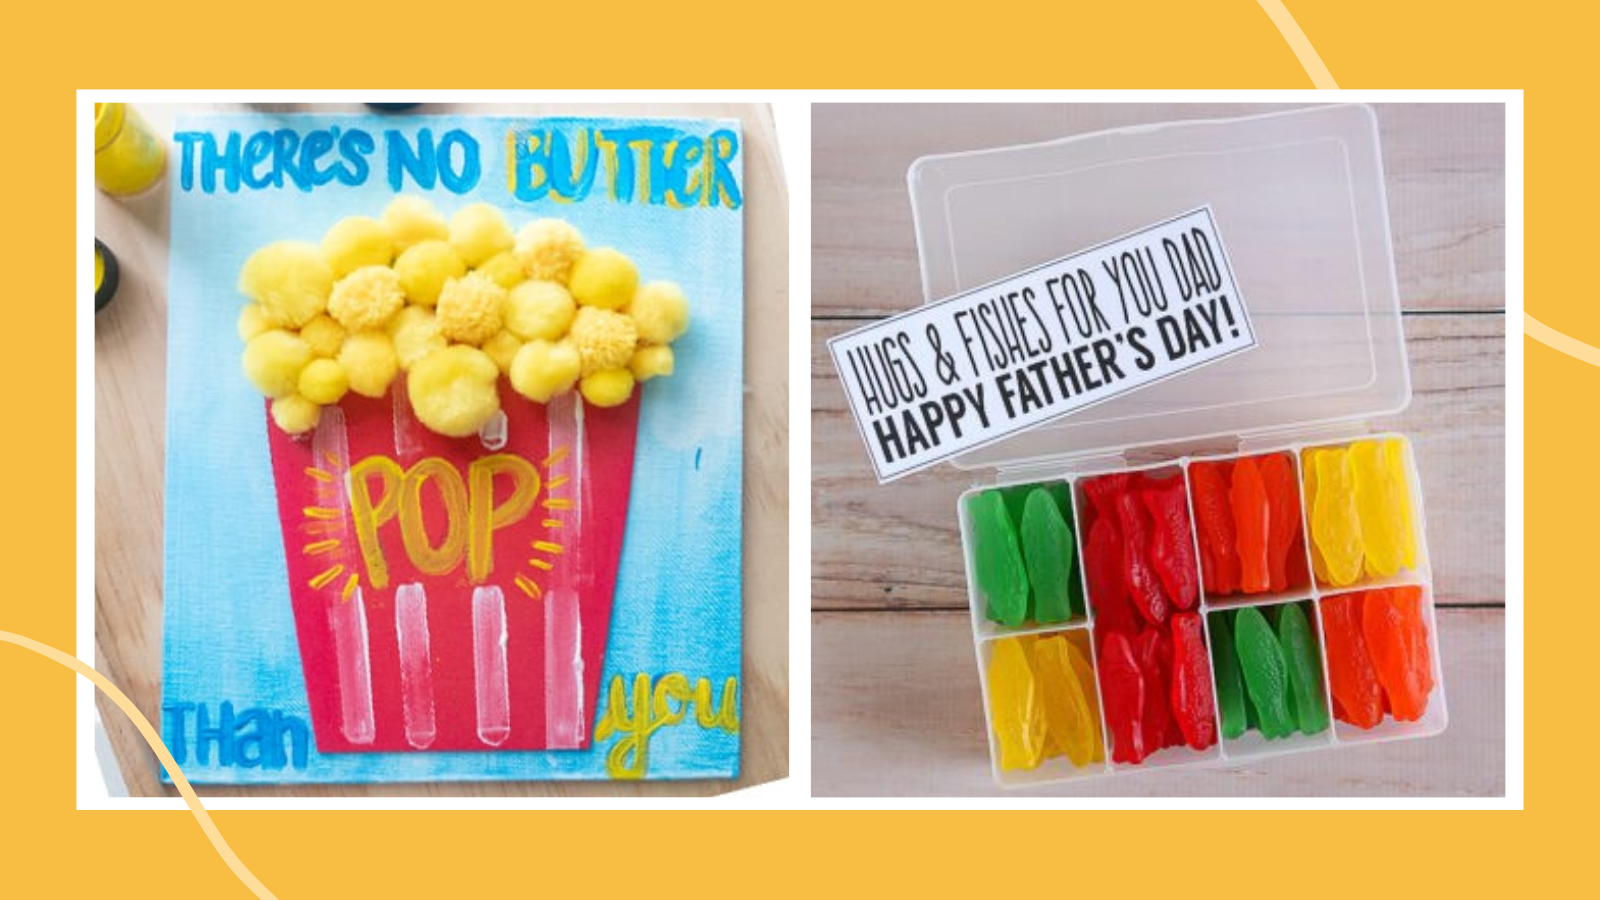 Father's Day crafts for kids including a popcorn canvas art that says, "There's no butter pop than you" and a tackle box with Swedish Fish that says "Hugs and Fishes to you dad. Happy Father's Day!"